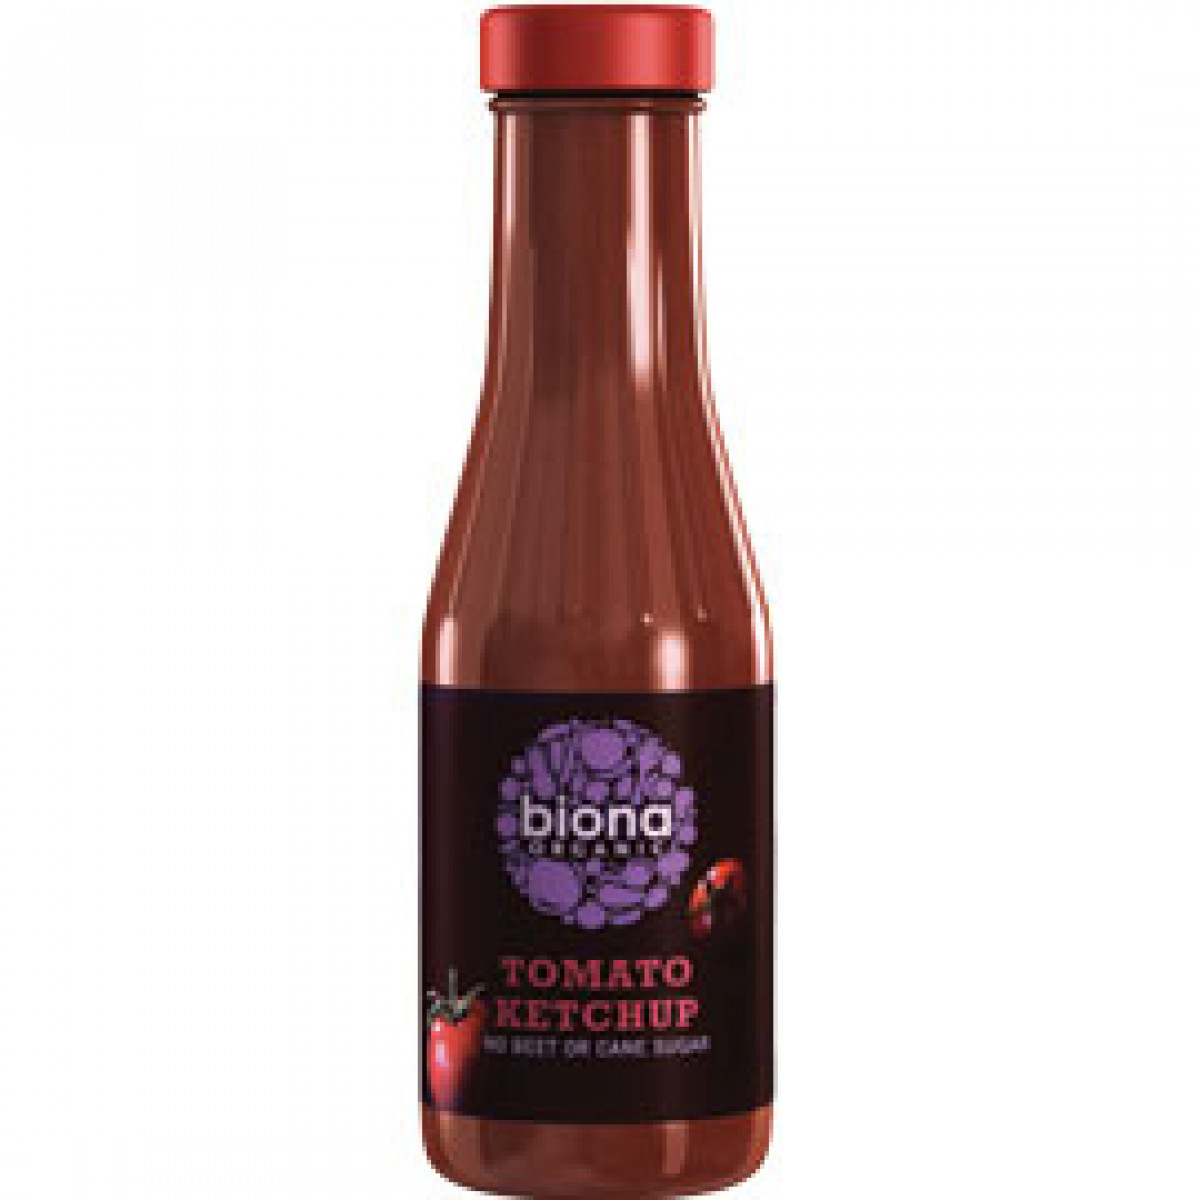 Product picture for Tomato Ketchup sweetened with Agave - Glass Bottle